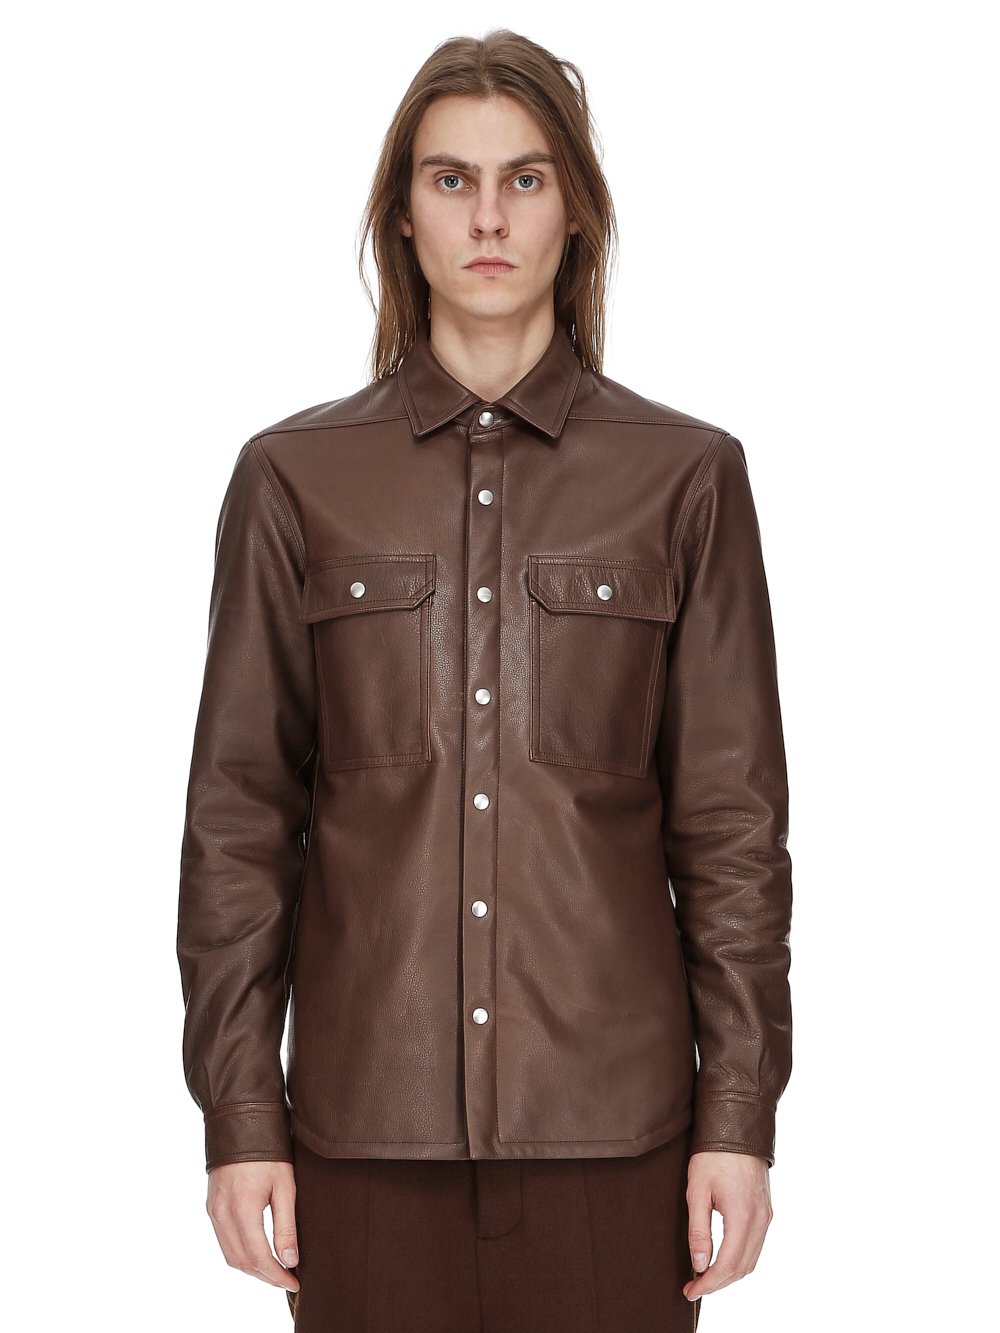 RICK OWENS FW23 LUXOR OUTERSHIRT IN BROWN SOFT GRAIN COW LEATHER